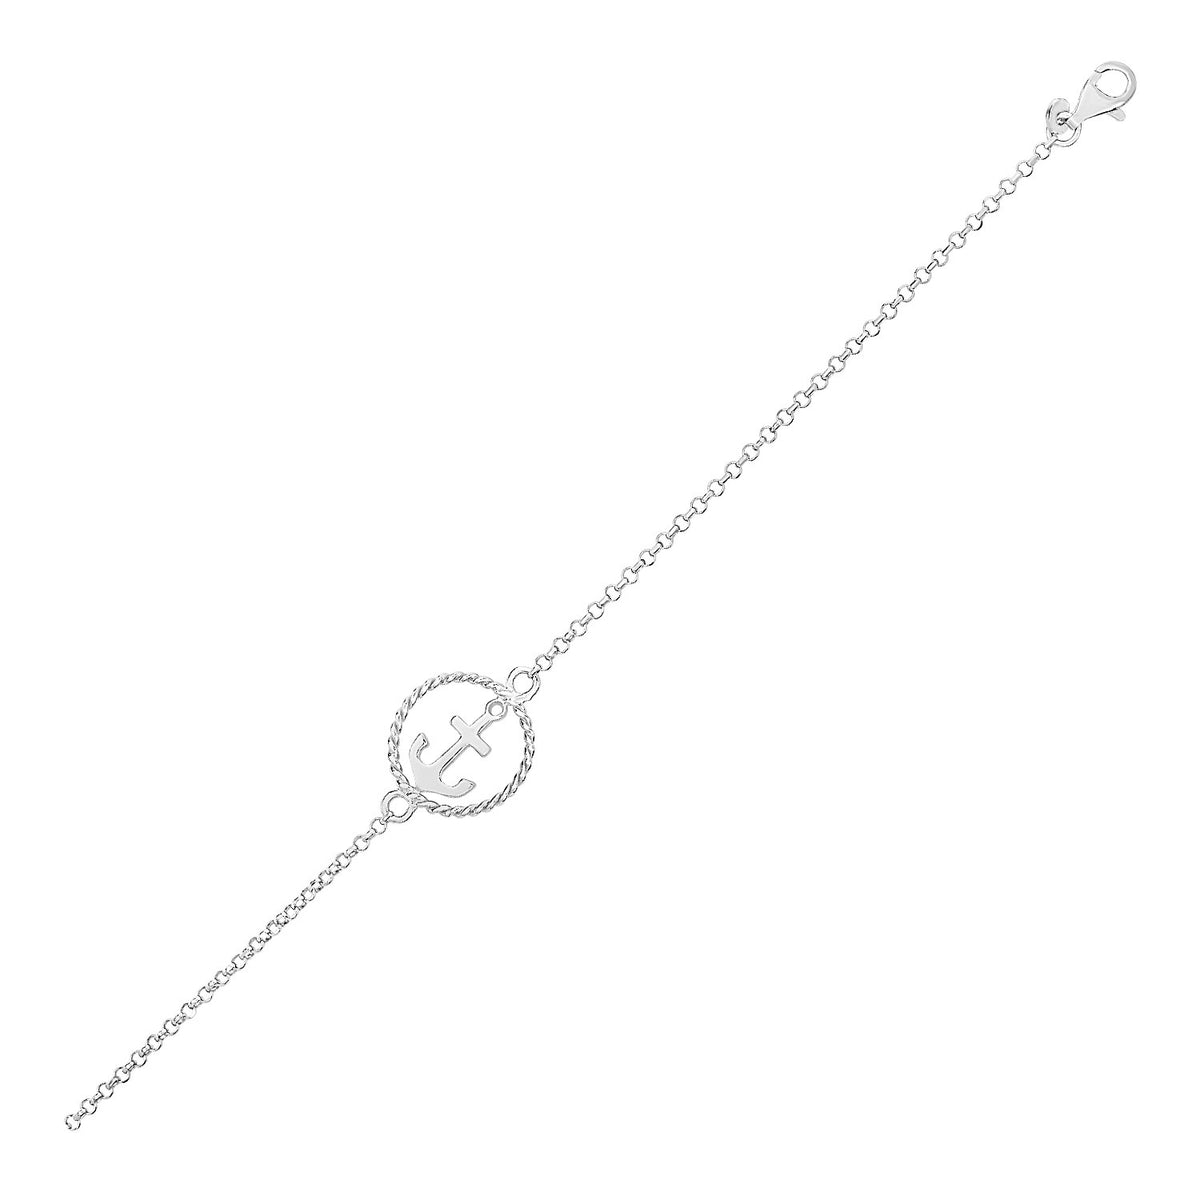 Bracelet with Anchor - Sterling Silver 1.80mm